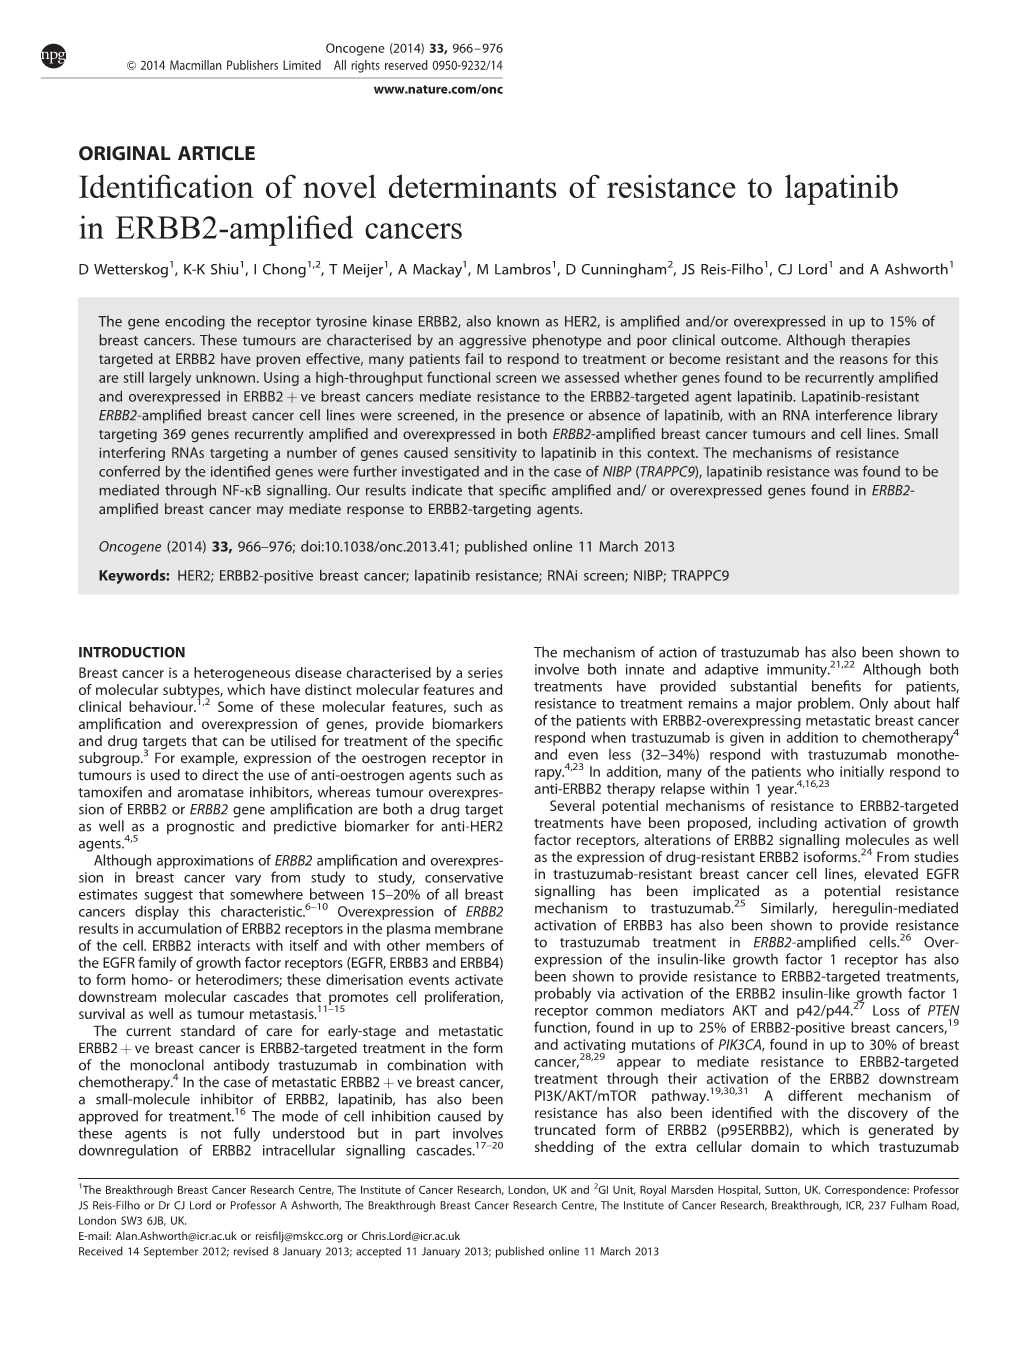 Identification of Novel Determinants of Resistance to Lapatinib in ERBB2-Amplified Cancers